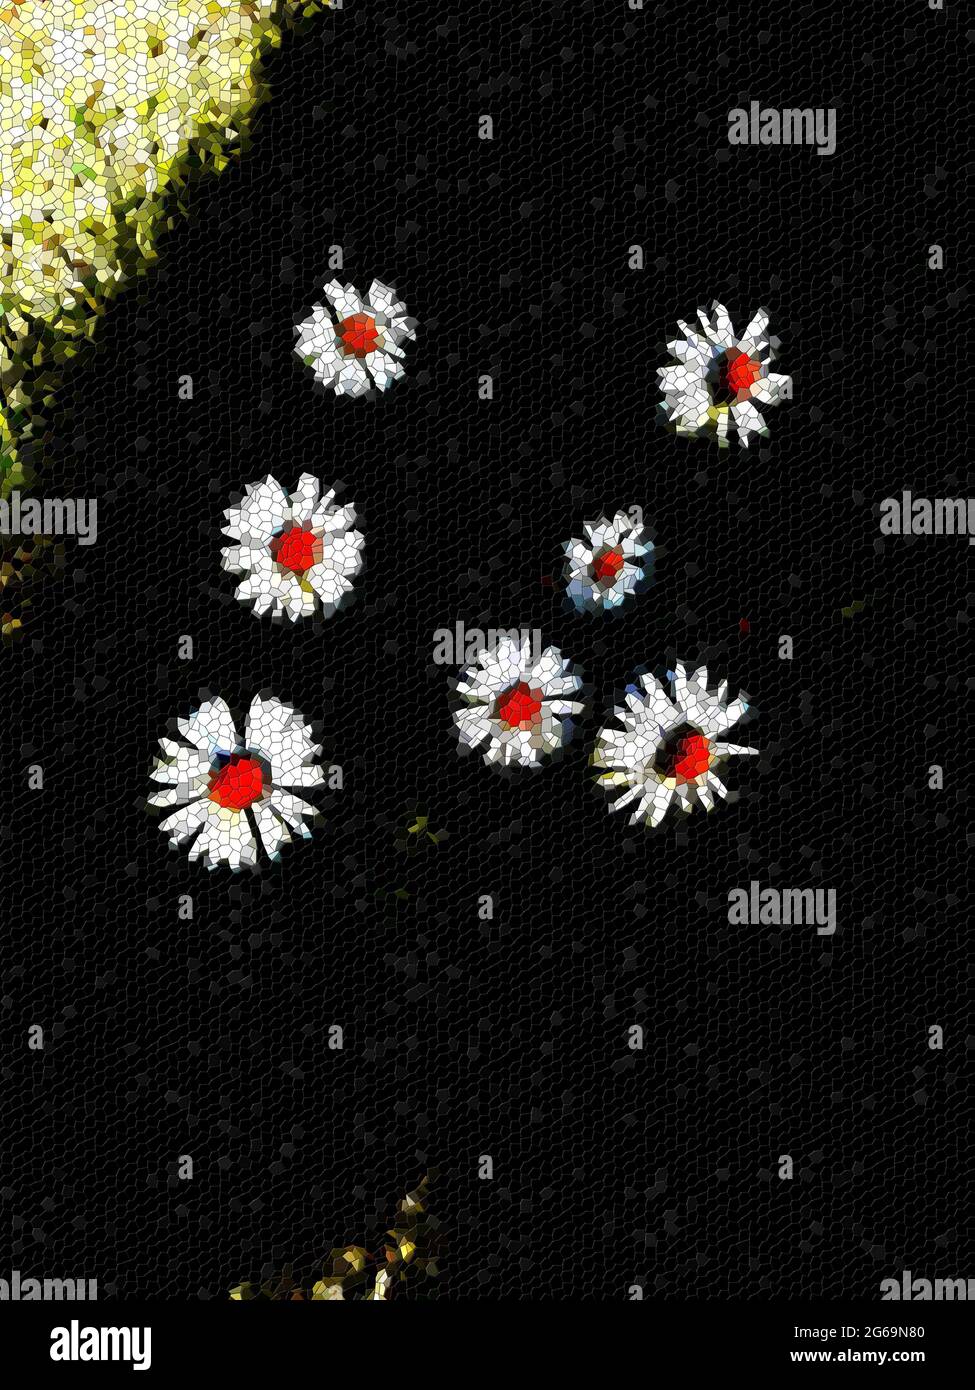 Mixed media photograph Daisies growing in a garden. Mosaic floral art countryside and wellbeing conversation. Daisies and country life mosaic. Stock Photo